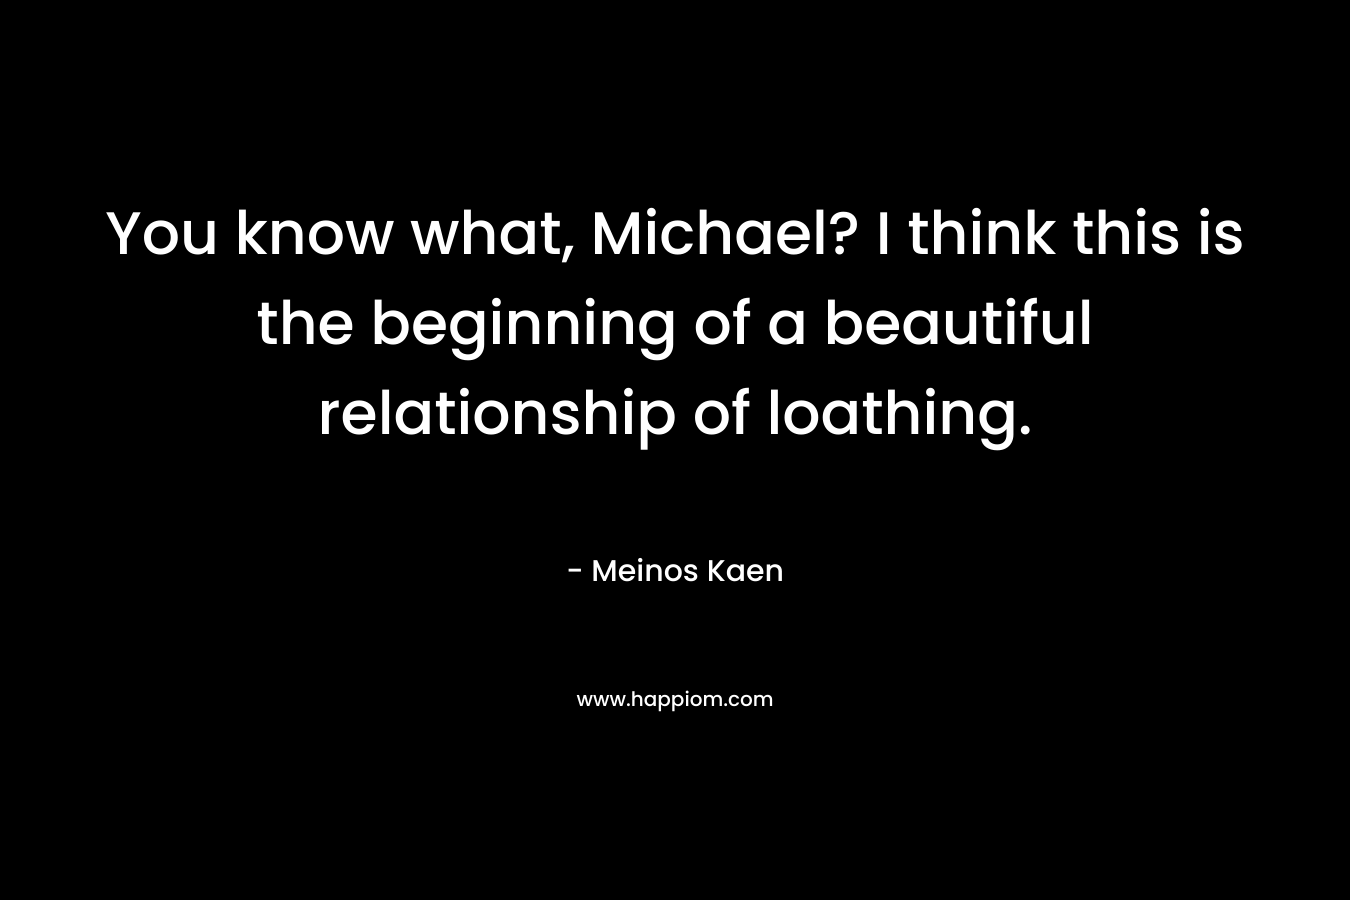 You know what, Michael? I think this is the beginning of a beautiful relationship of loathing. – Meinos Kaen